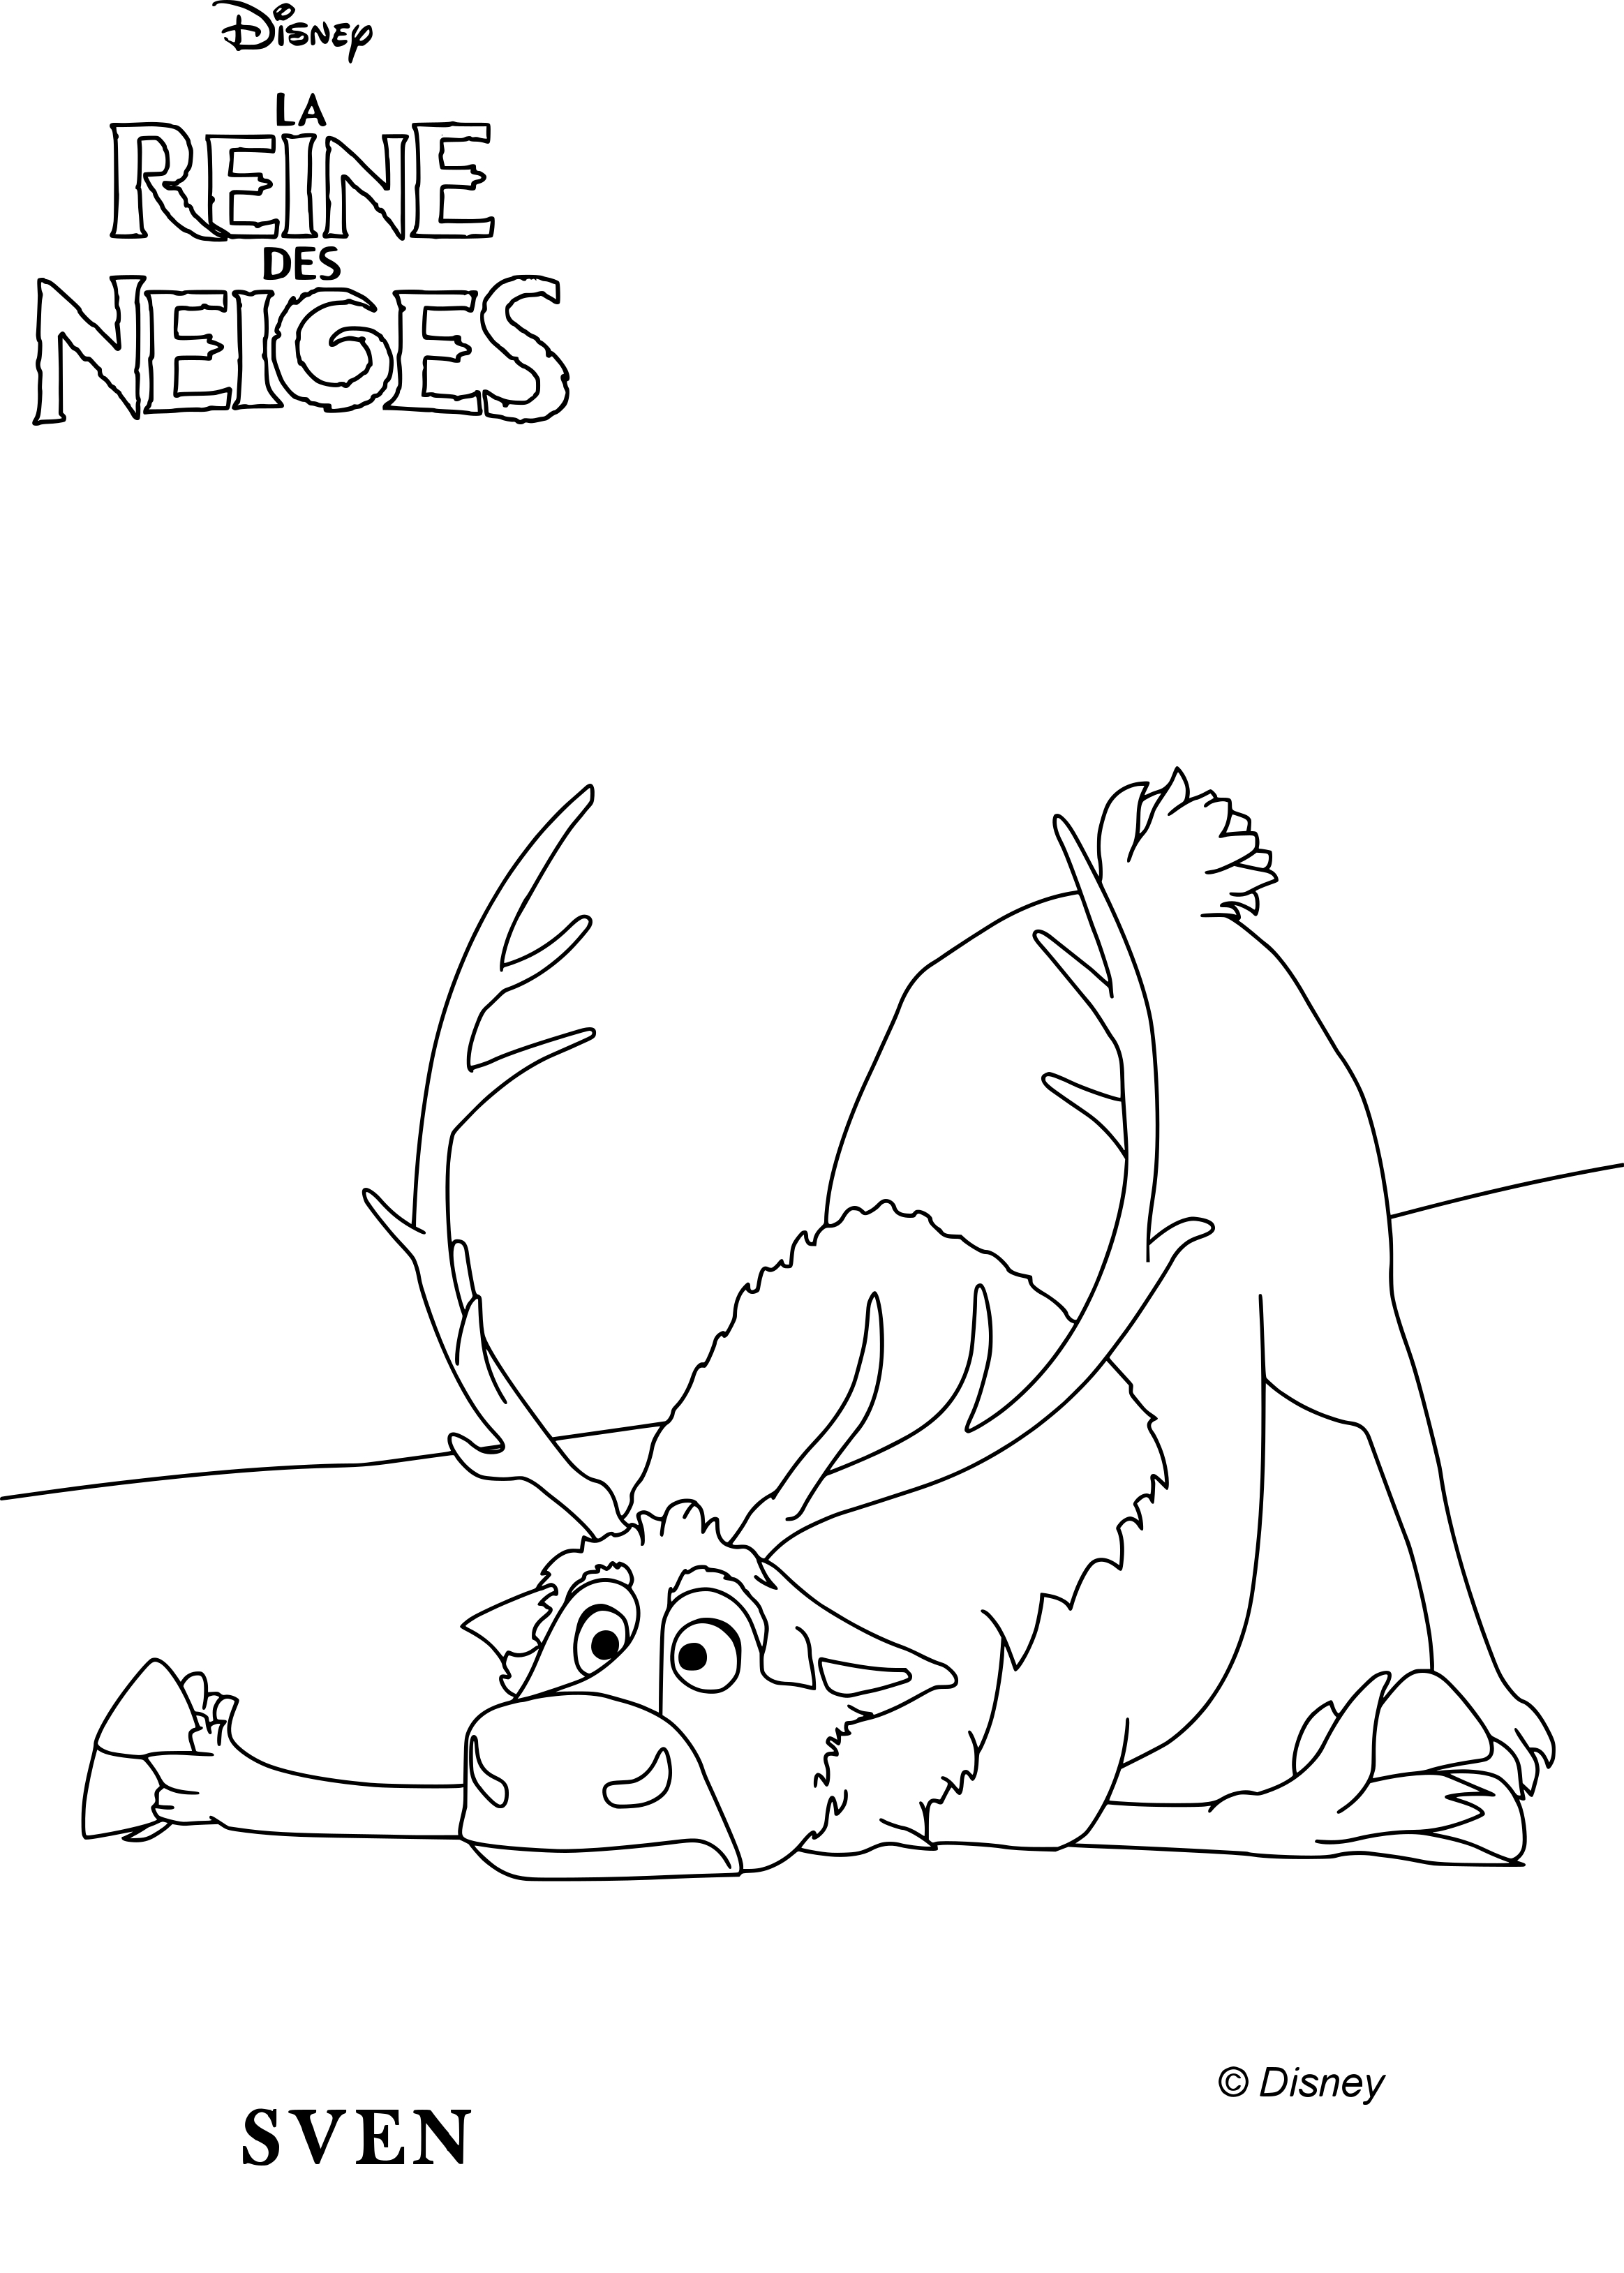 Frozen Sven coloring page